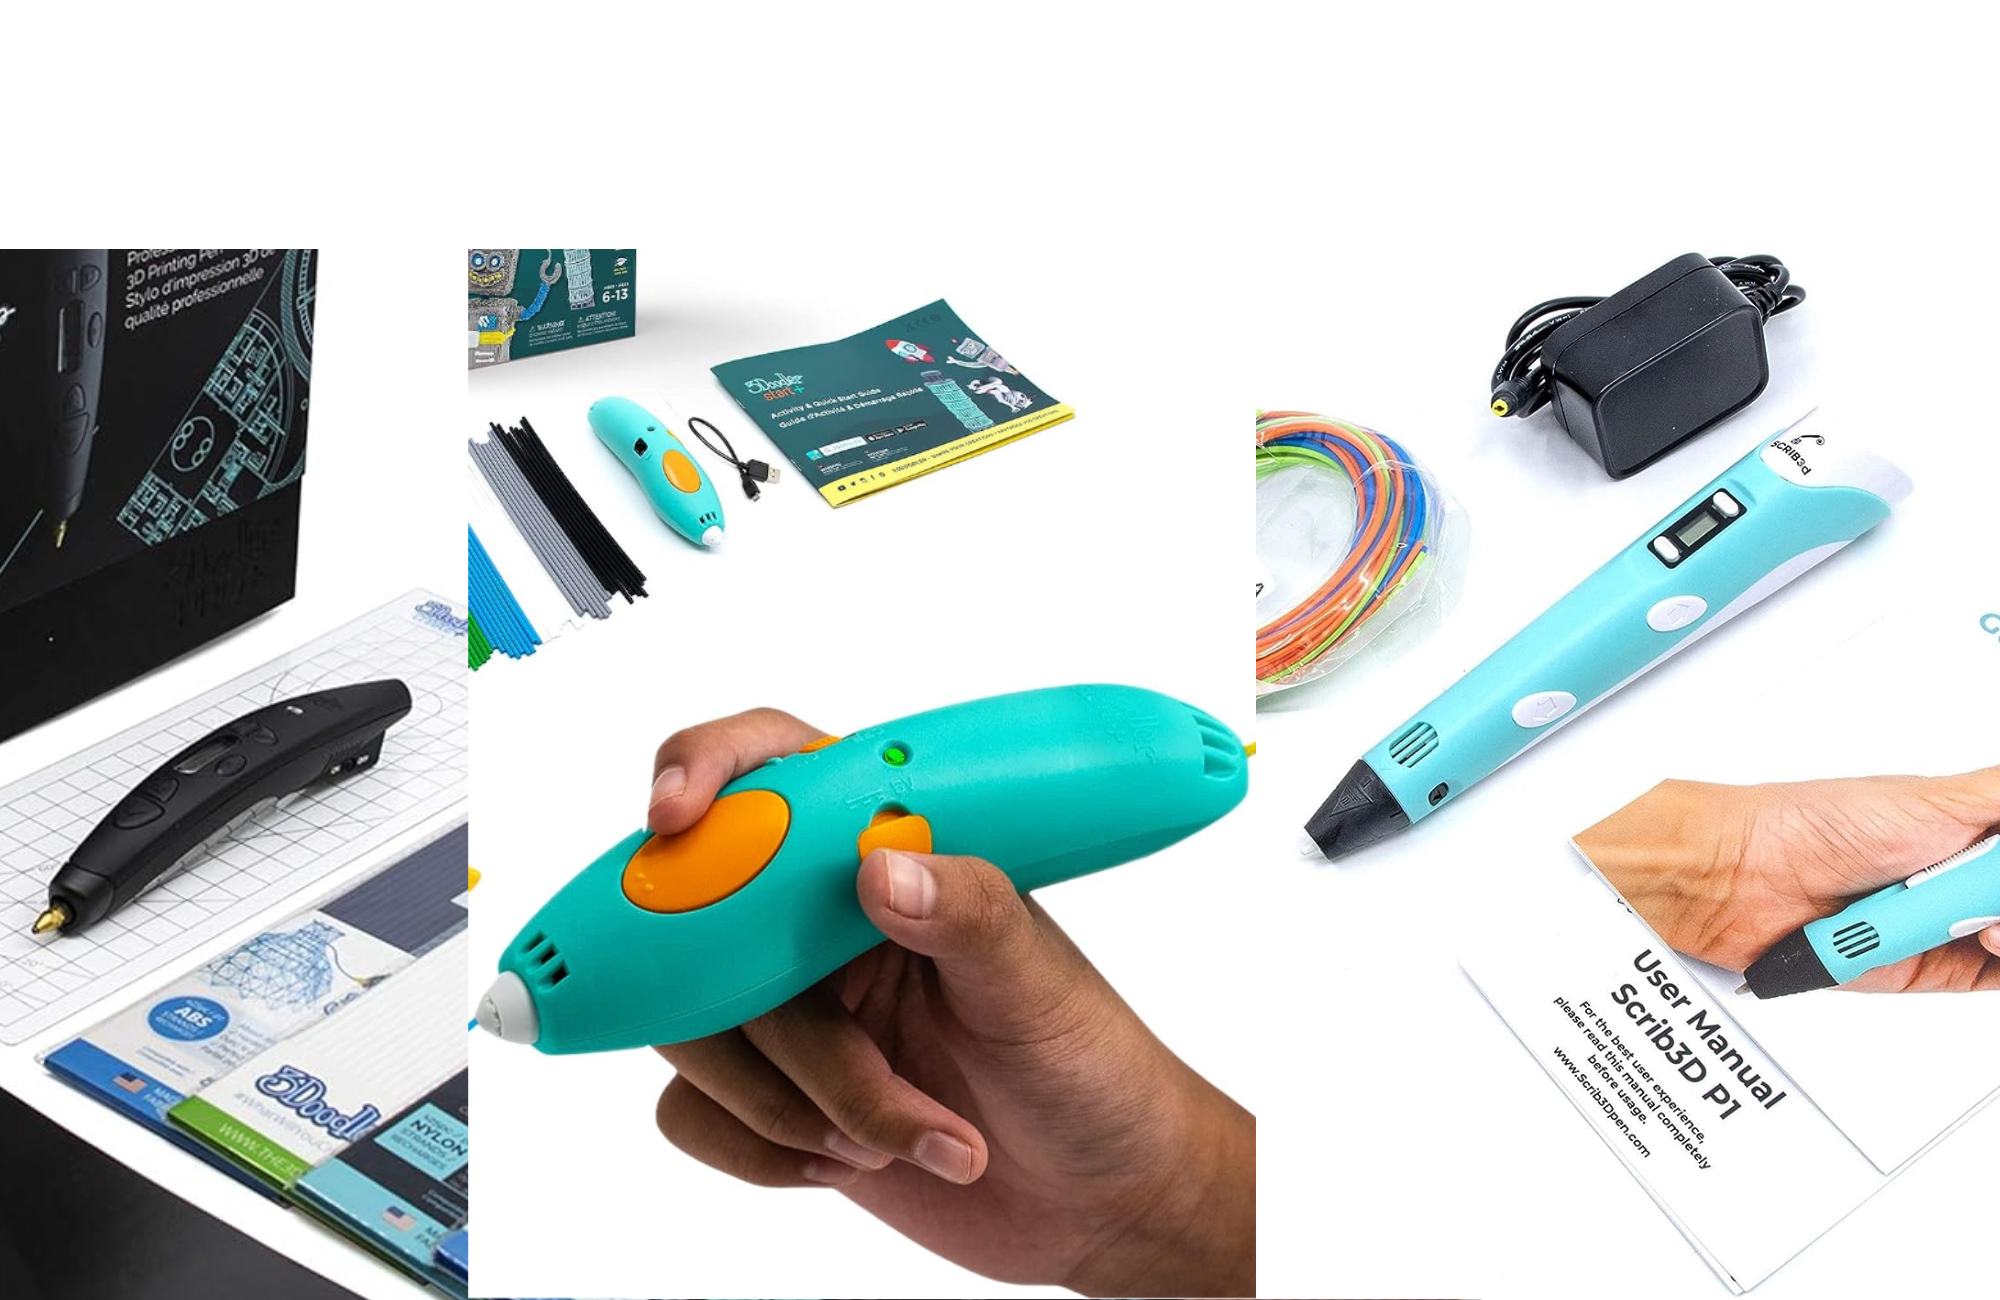 Want to buy a 3D pen? - Best selling 3D pens in the Netherlands - 3D&Print